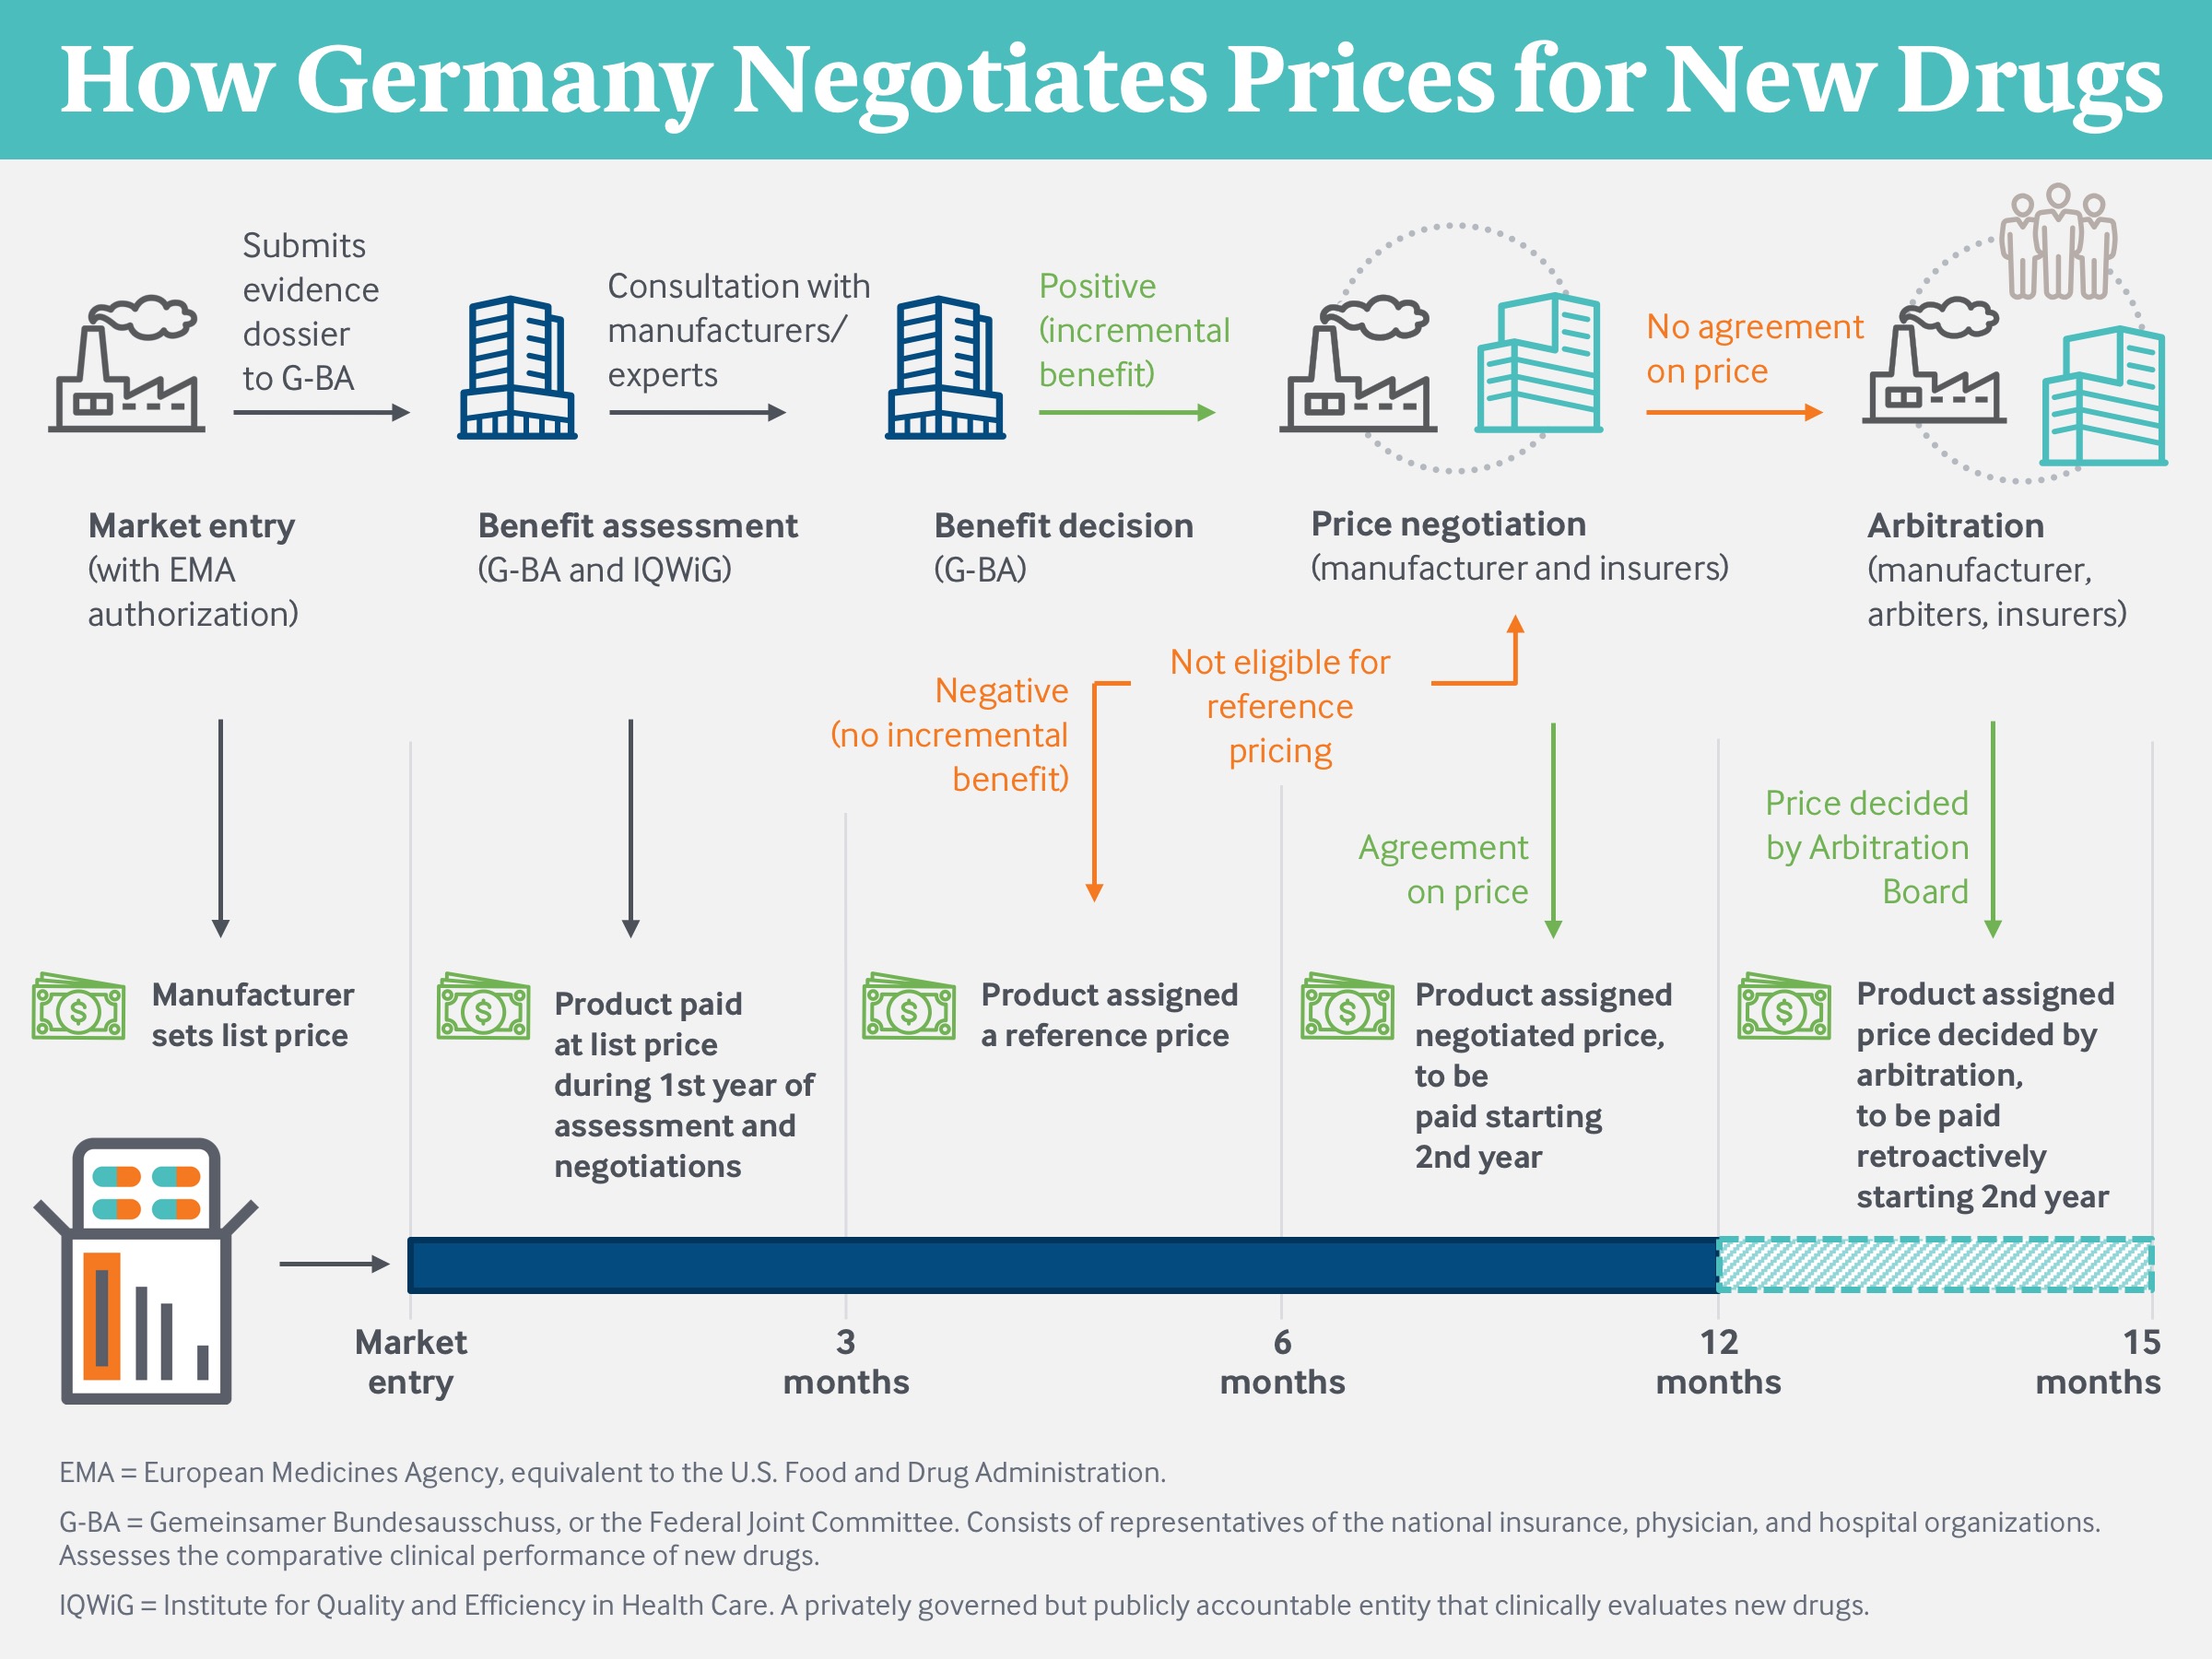 How Germany Negotiates Prices for New Drugs